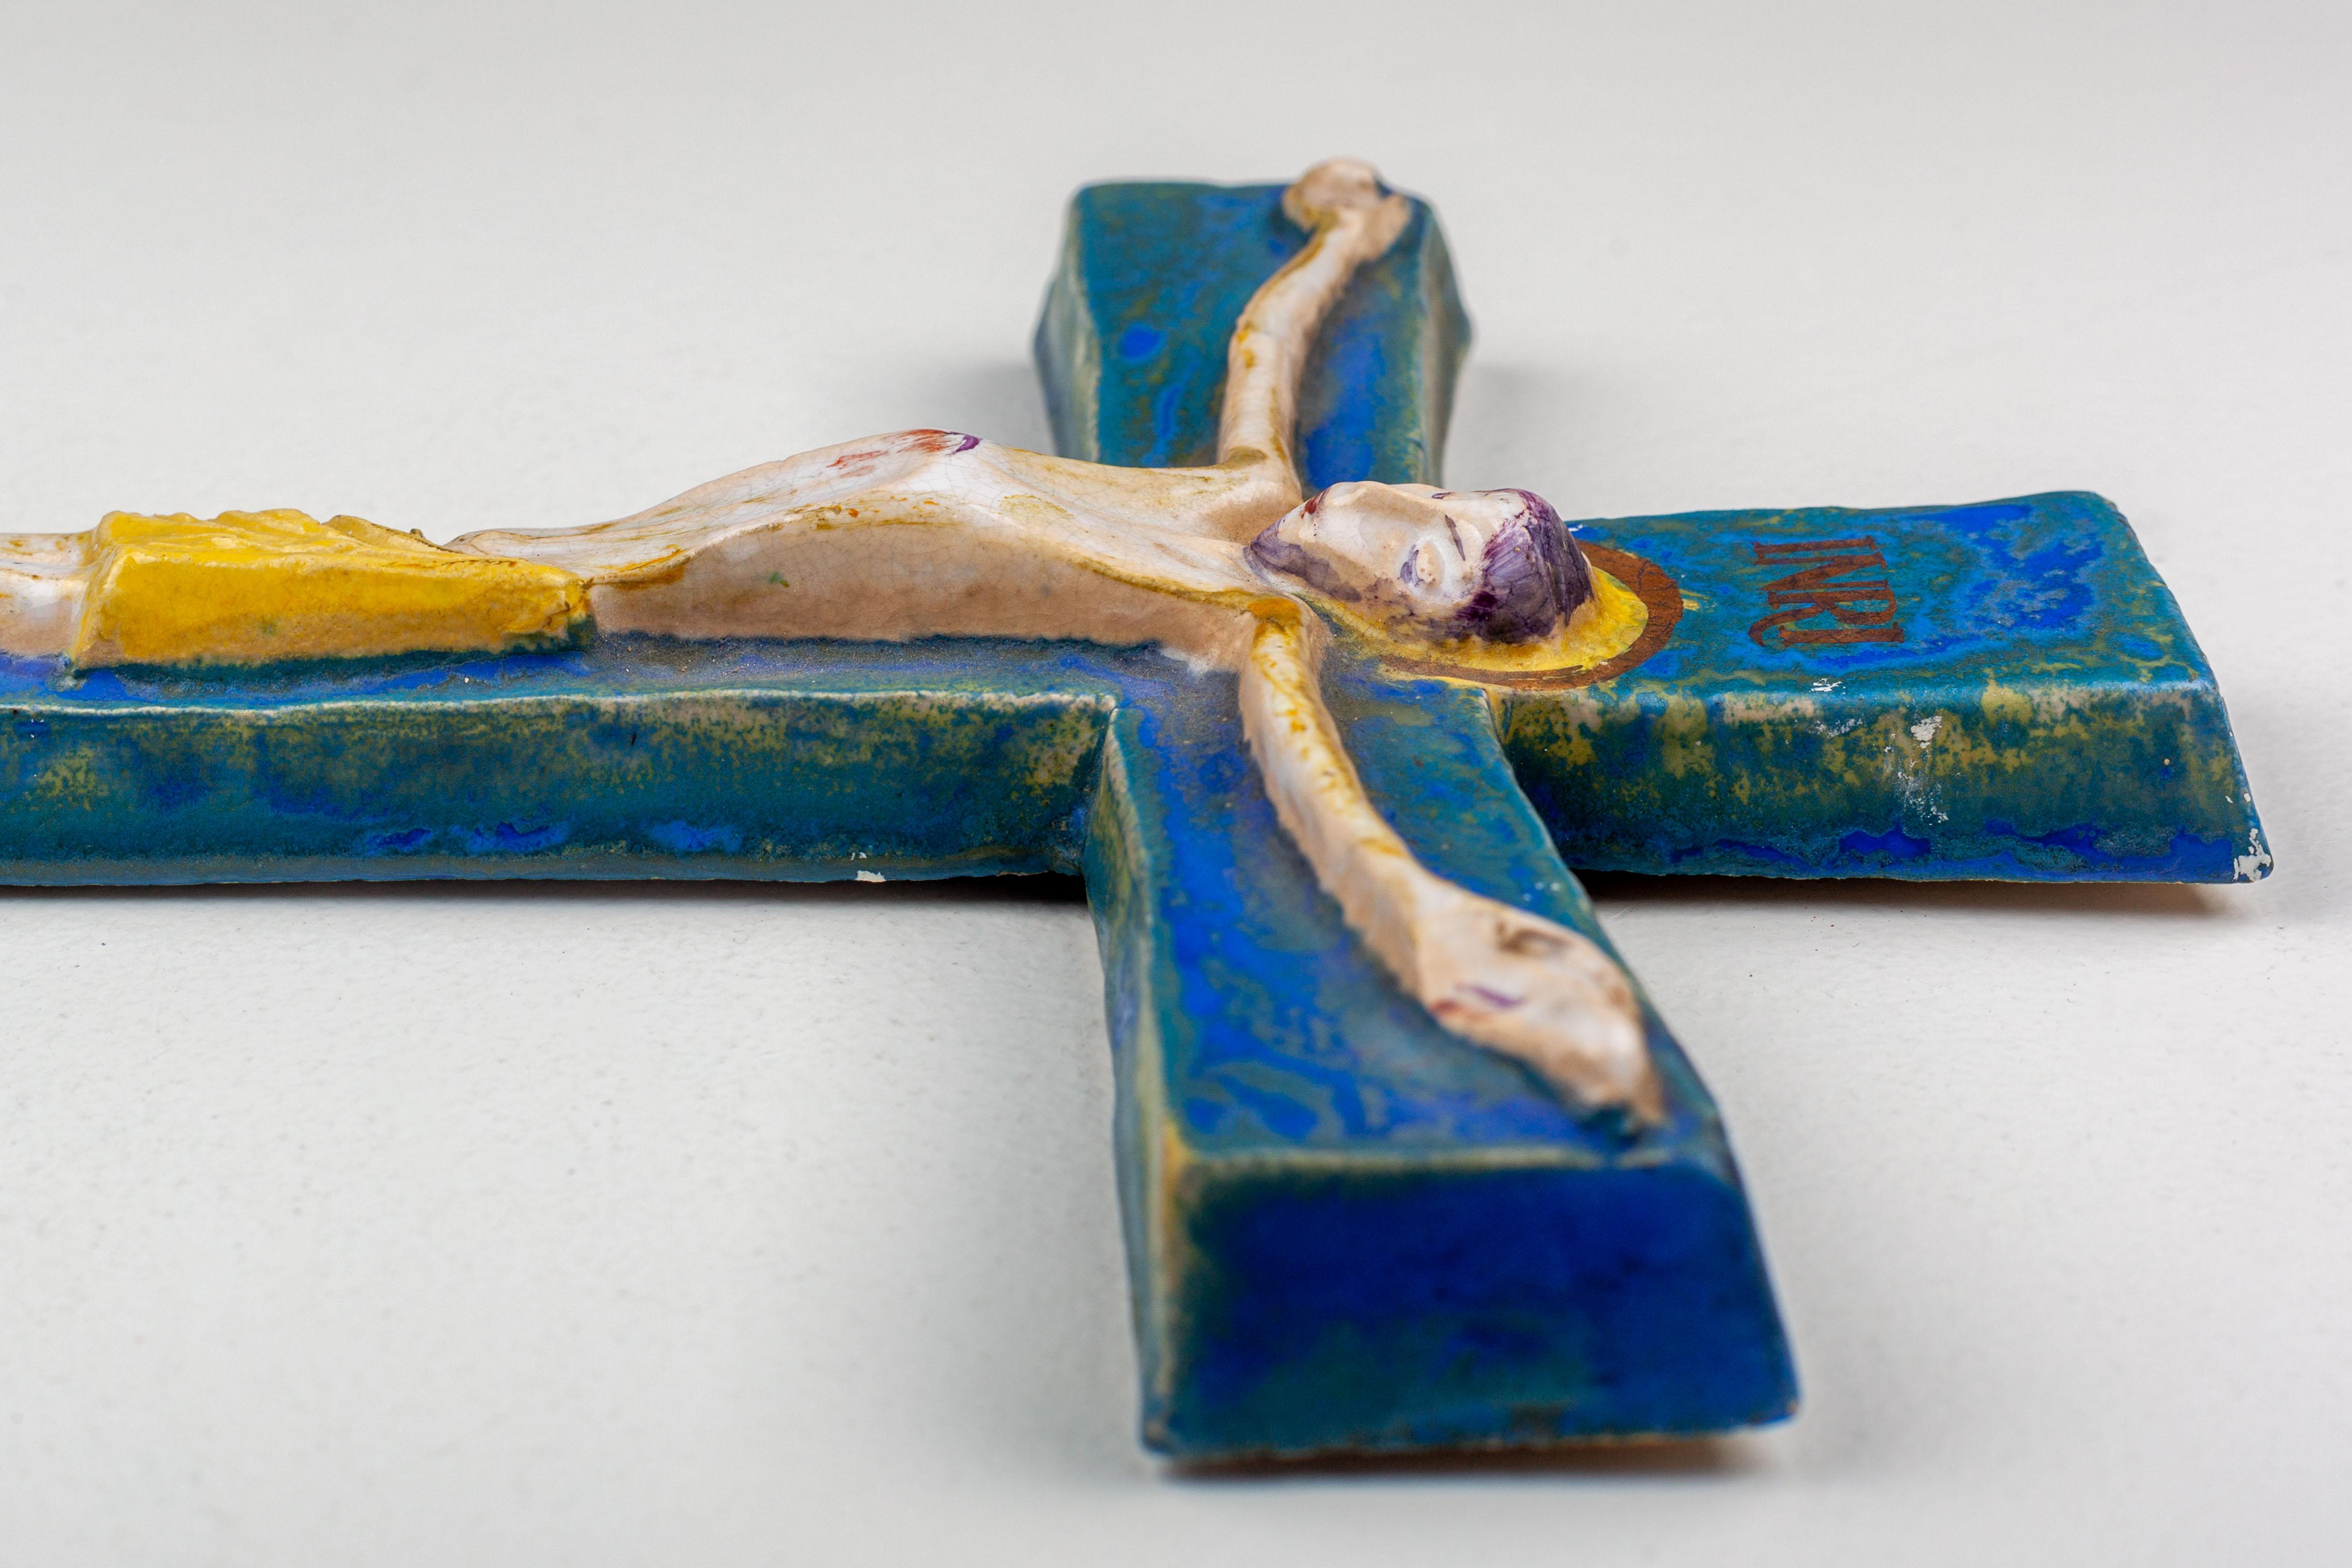 Ceramic Modernist Cobalt Blue and Gold Wall Cross - European Studio Pottery Masterpiece For Sale